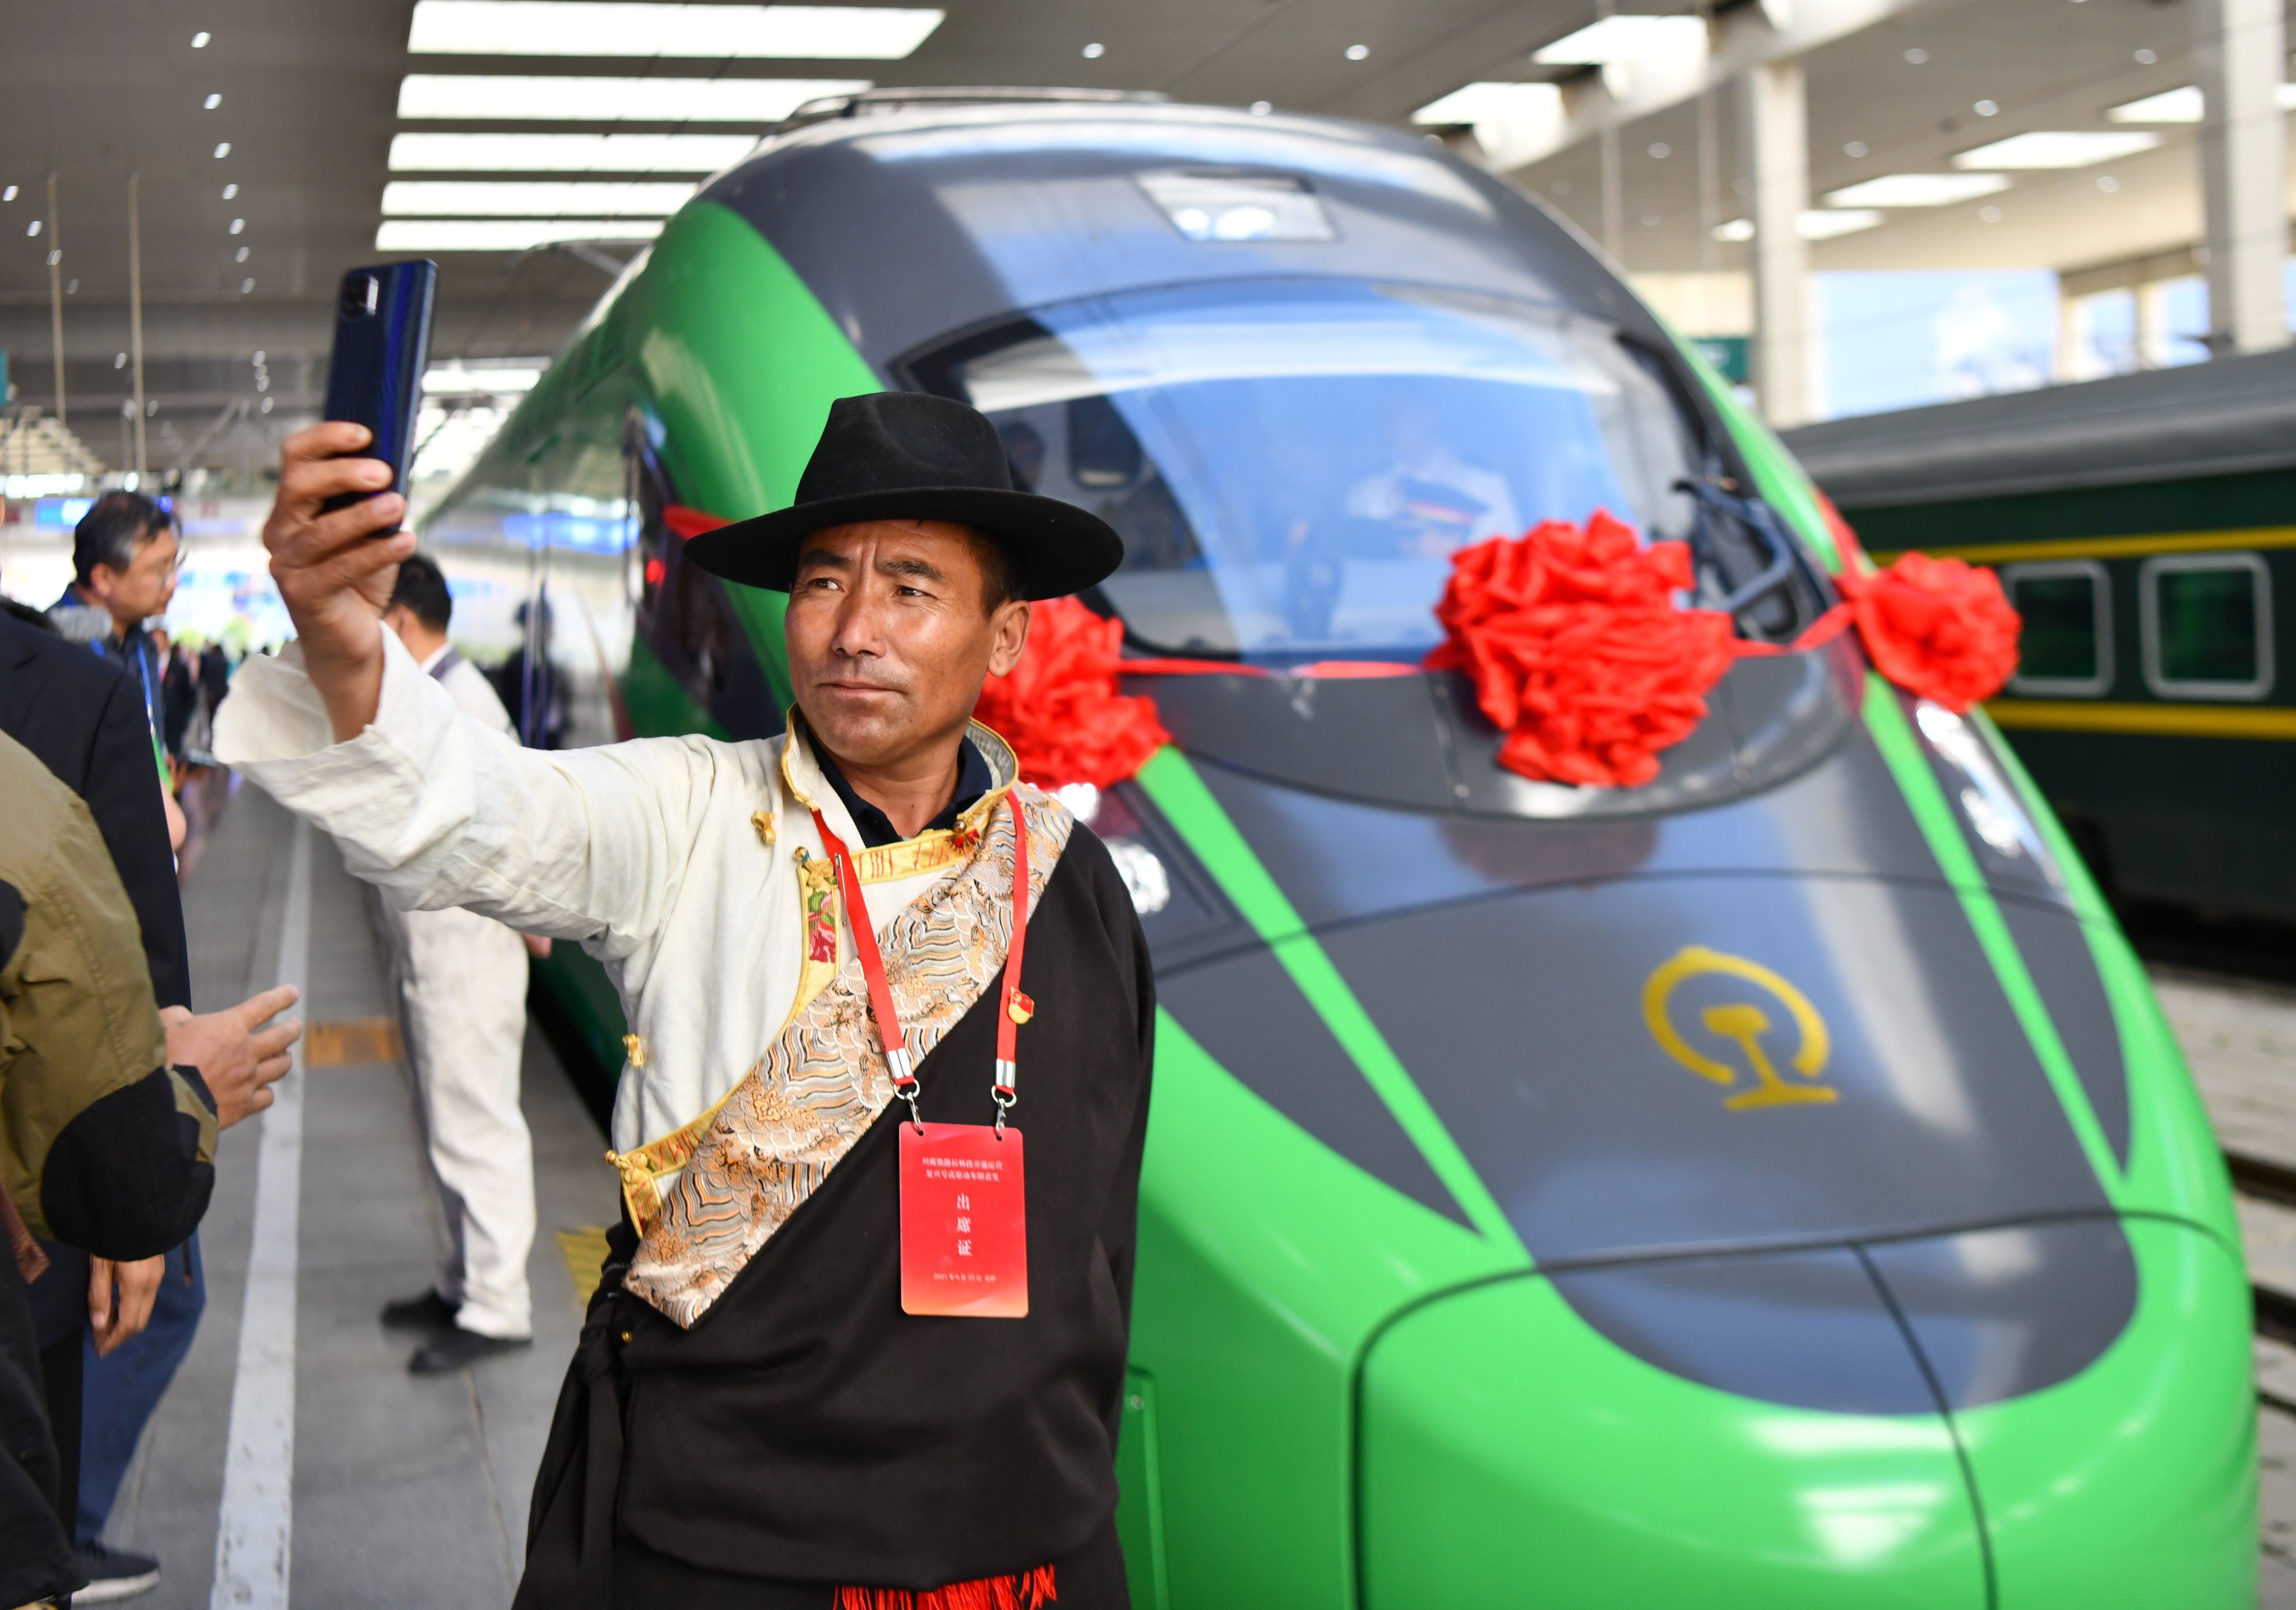 A passenger takes a selfie in front of a bullet train during the opening of the Lhasa-Nyingchi railway in southwest China’s Tibet autonomous region in June 2021. Photo: Xinhua